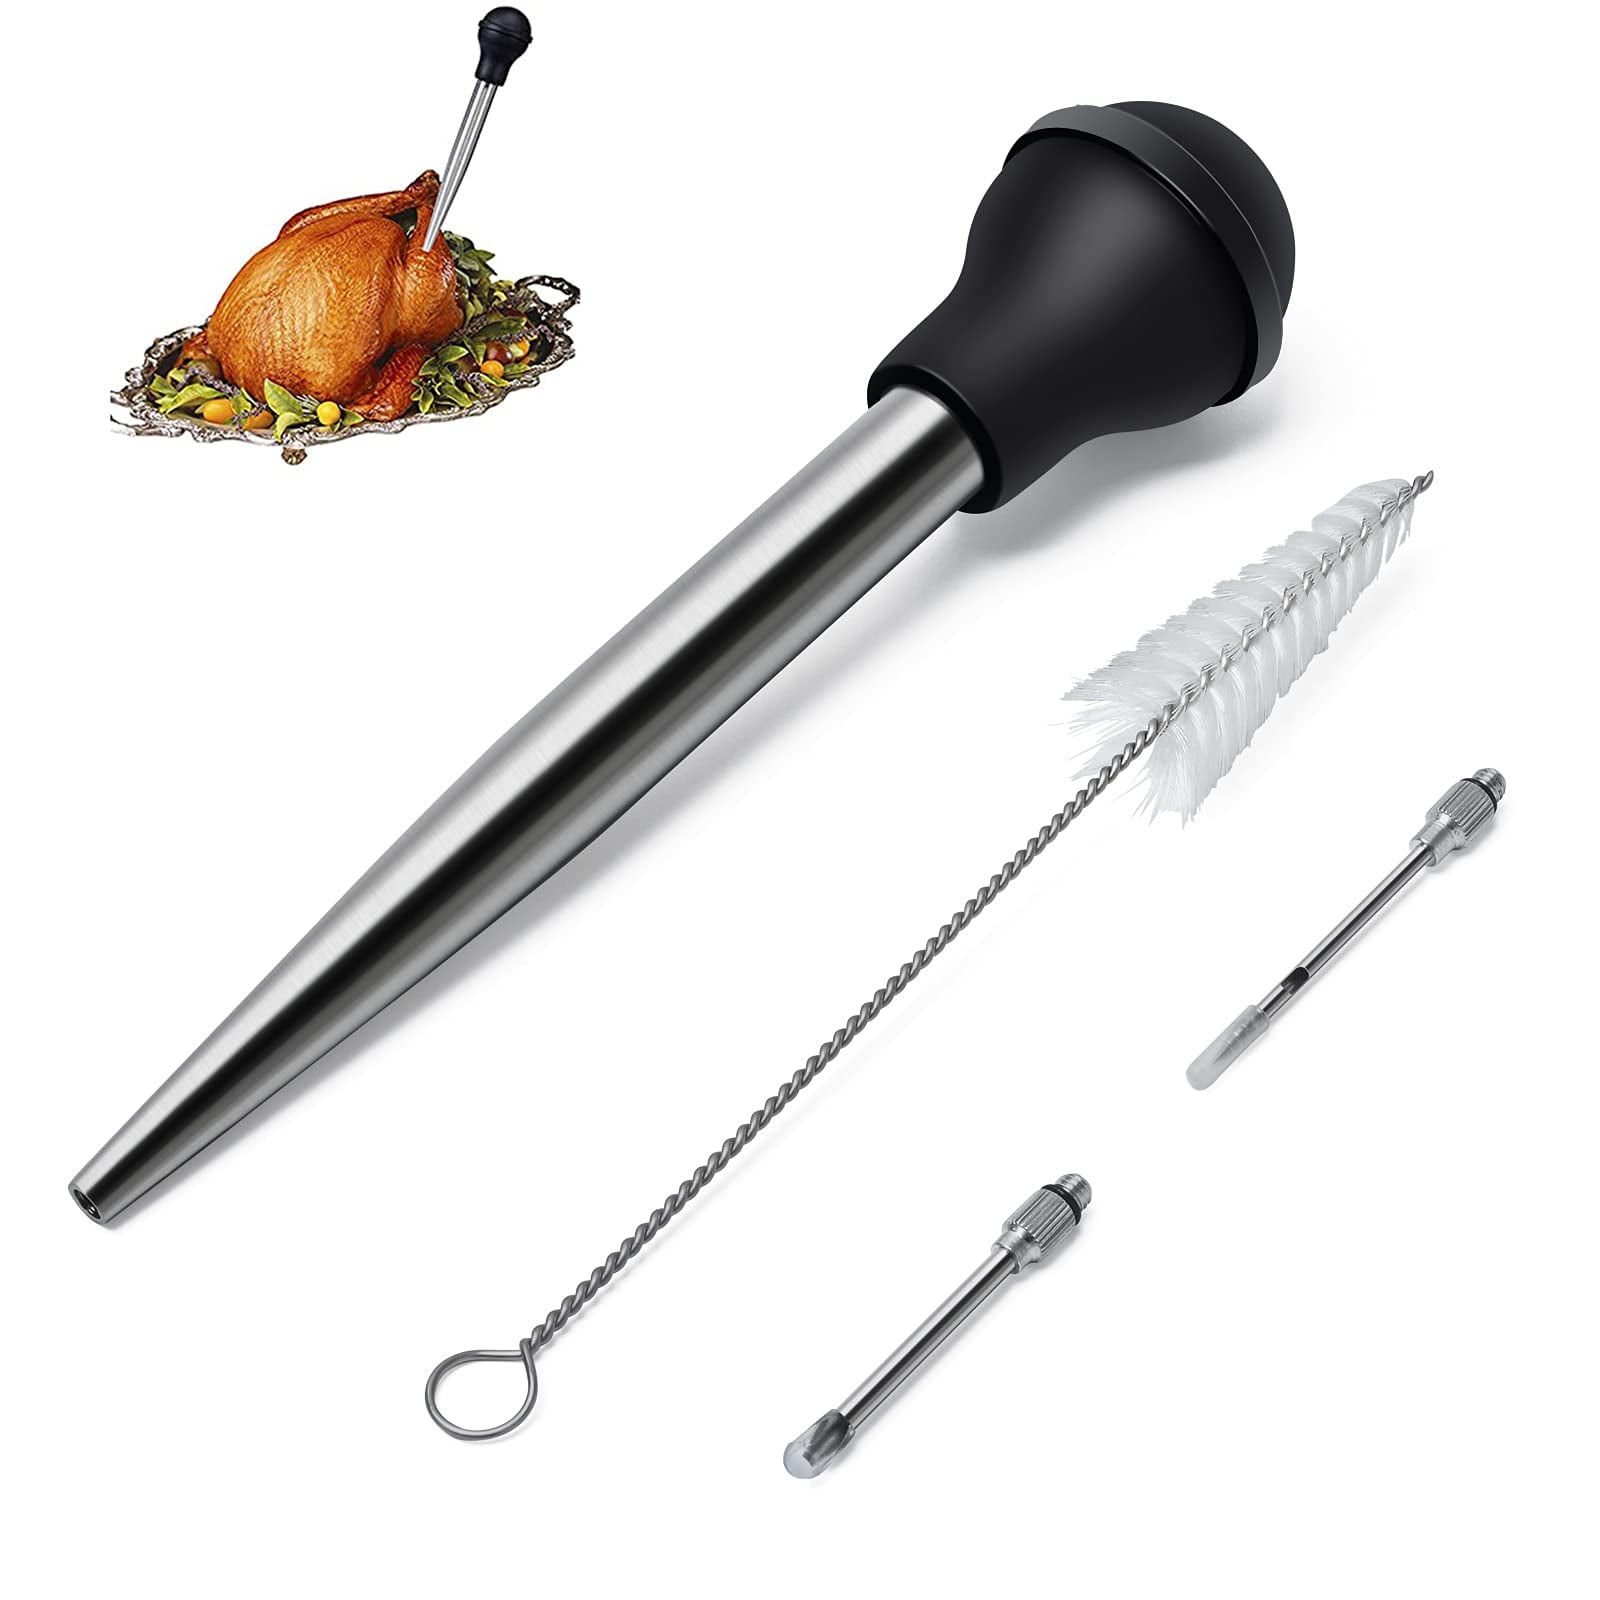 Fish Turkey Baster Syringe Cooking Set Pork Marinade Needles and Cleaning Brush for BBQ Grill Baking Kitchen Cooking Tool Black Stainless Steel Meat Baster Syringe with Silicone Bulb Beef 